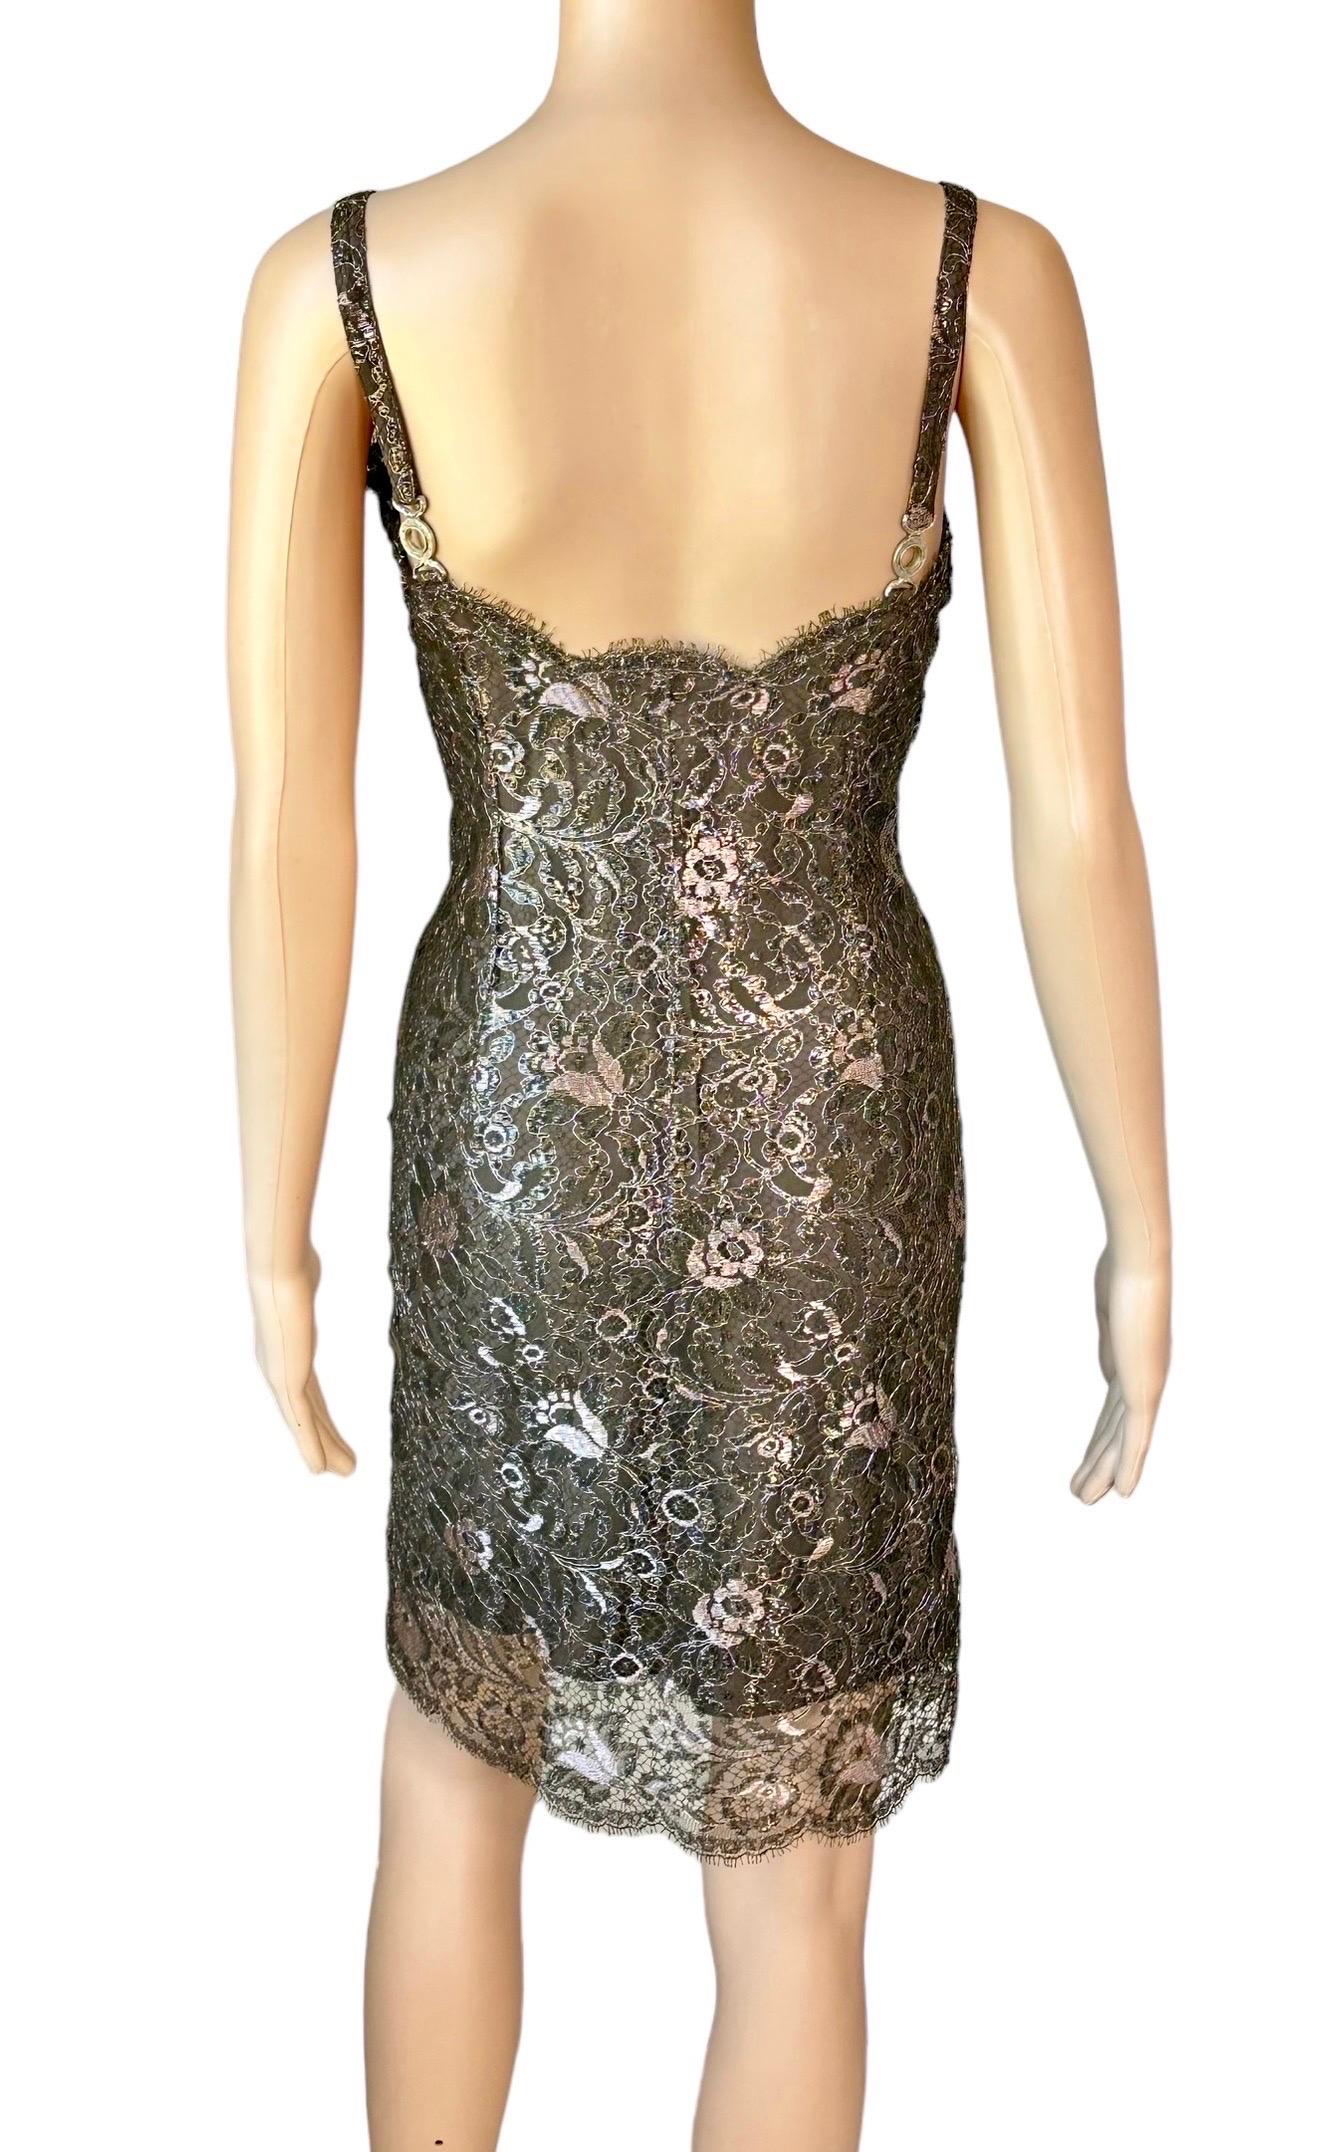 Gianni Versace F/W 1996 Vintage Metallic Floral Lace Brown Mini Dress  In Good Condition For Sale In Naples, FL